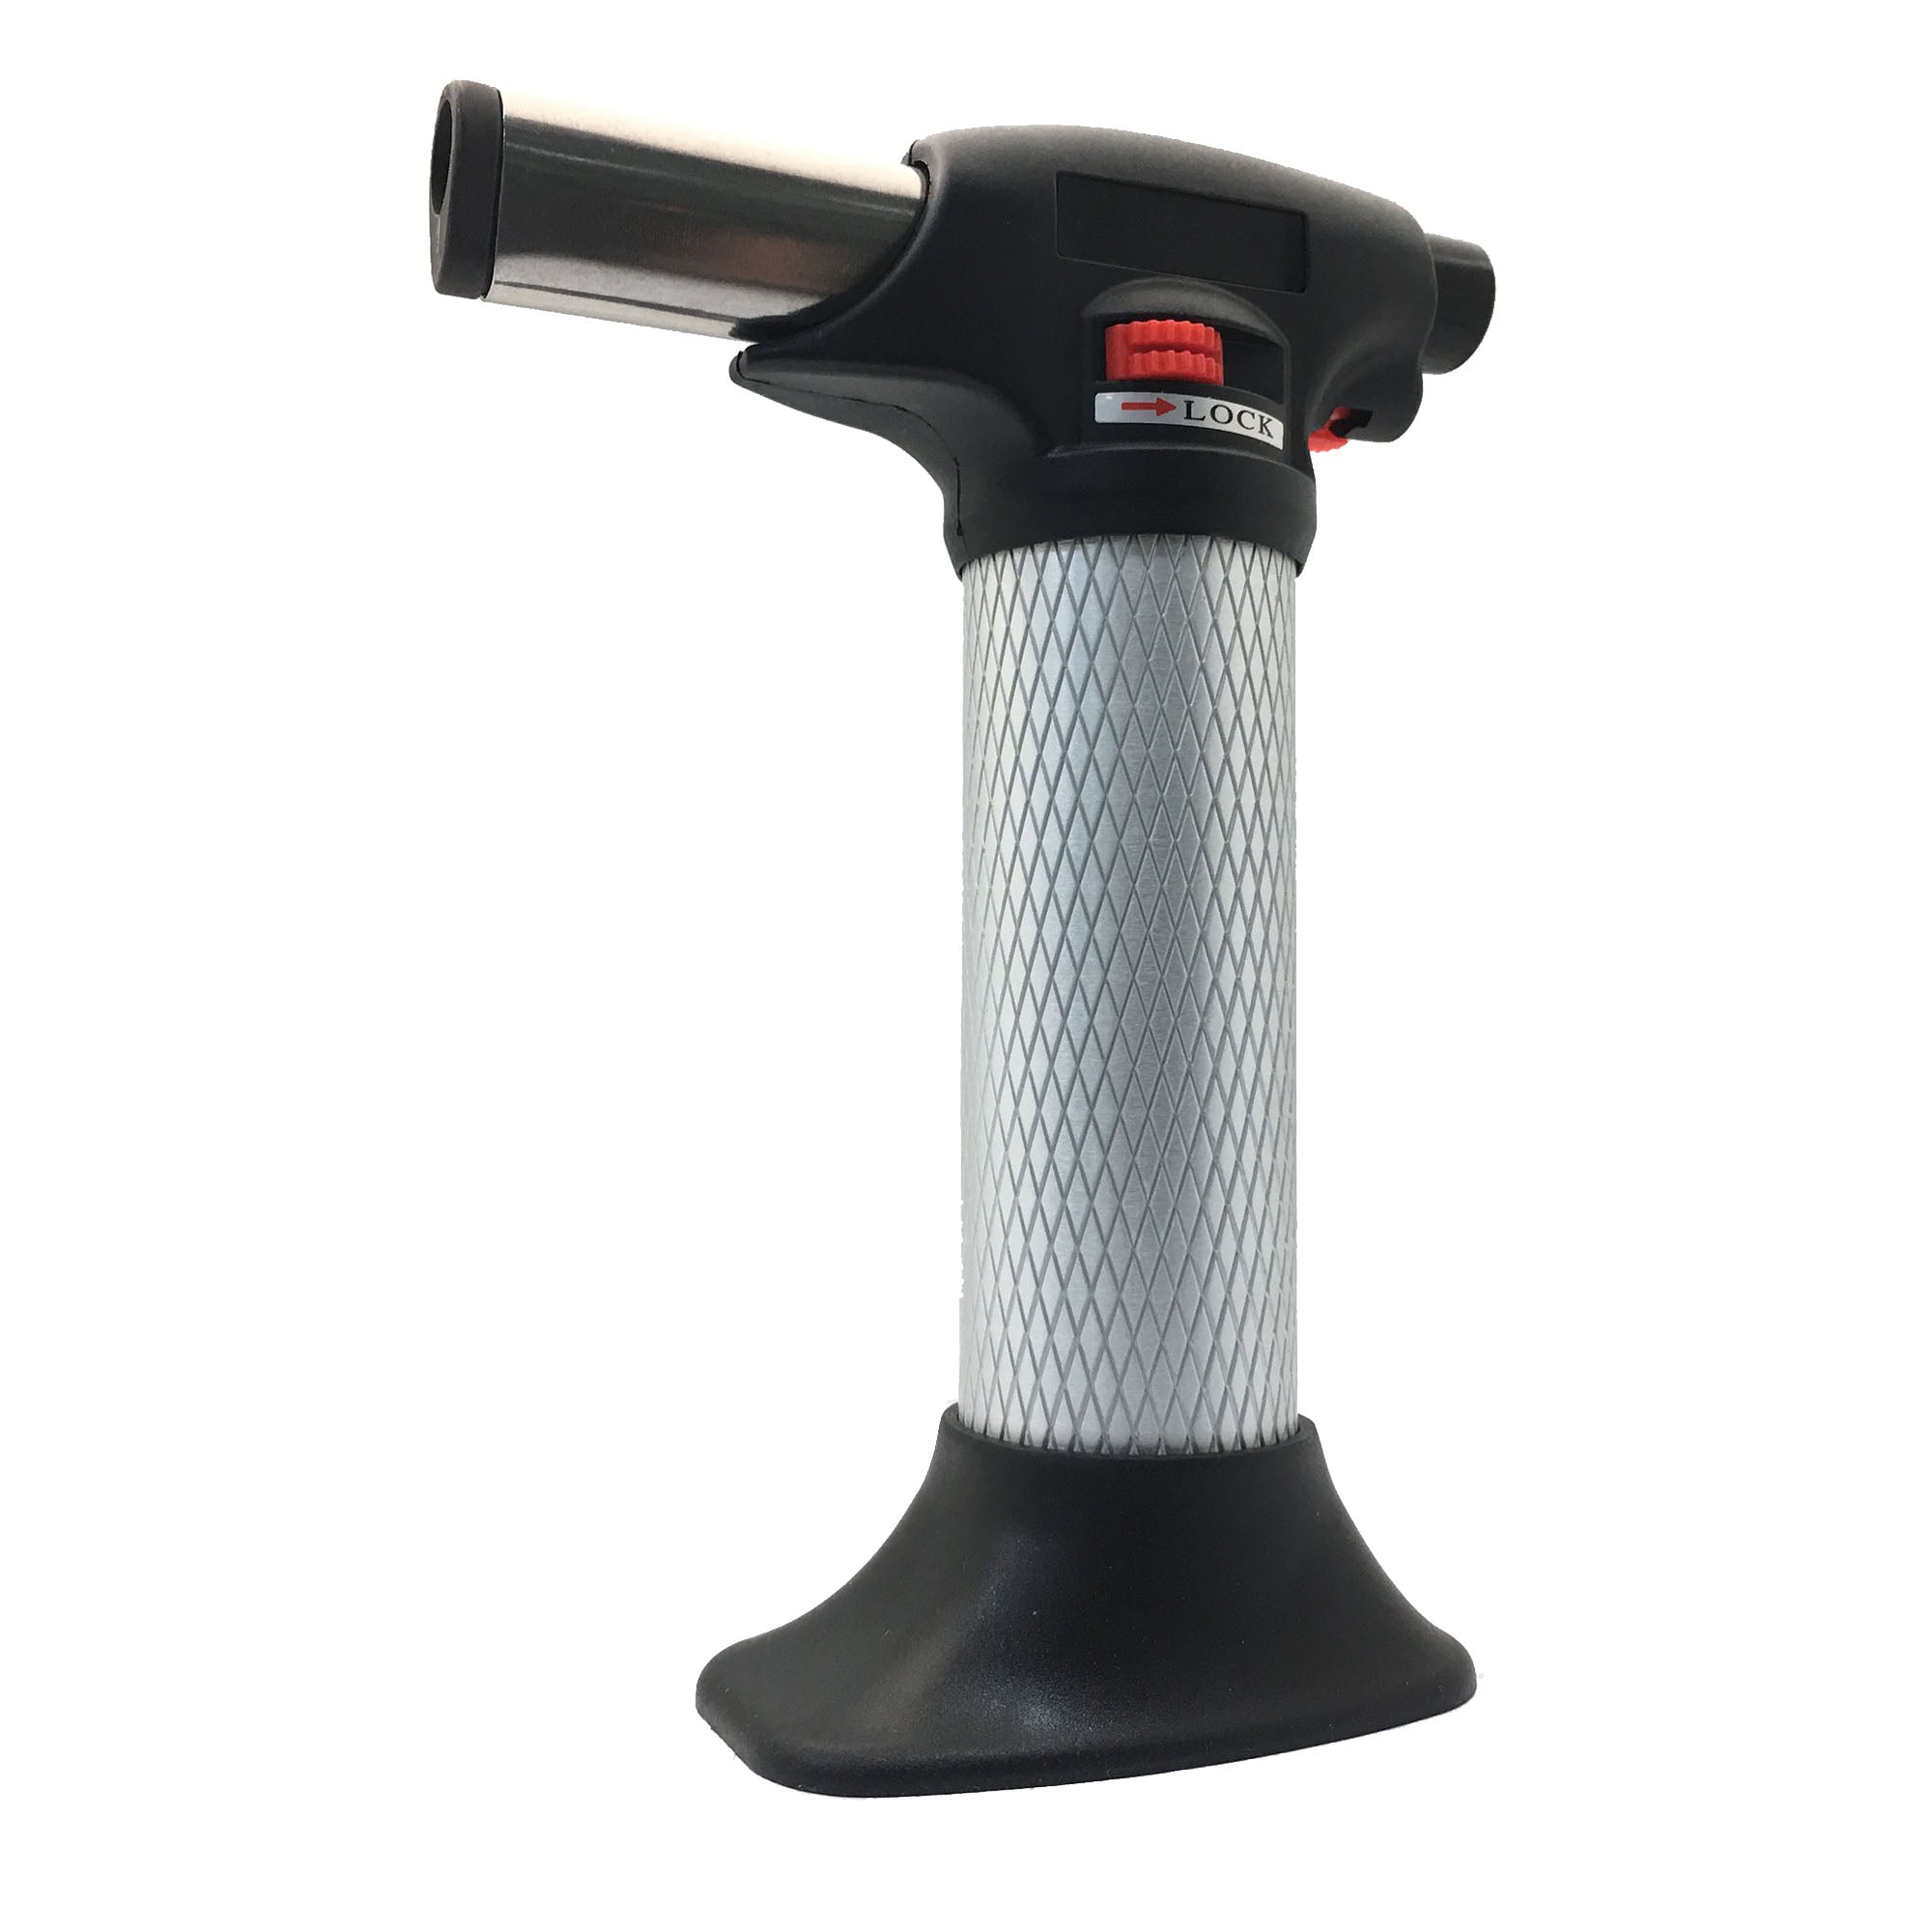 Crème Brulee Torch AH-2070 Cooking Blow Torch and Blow Torch Distributor